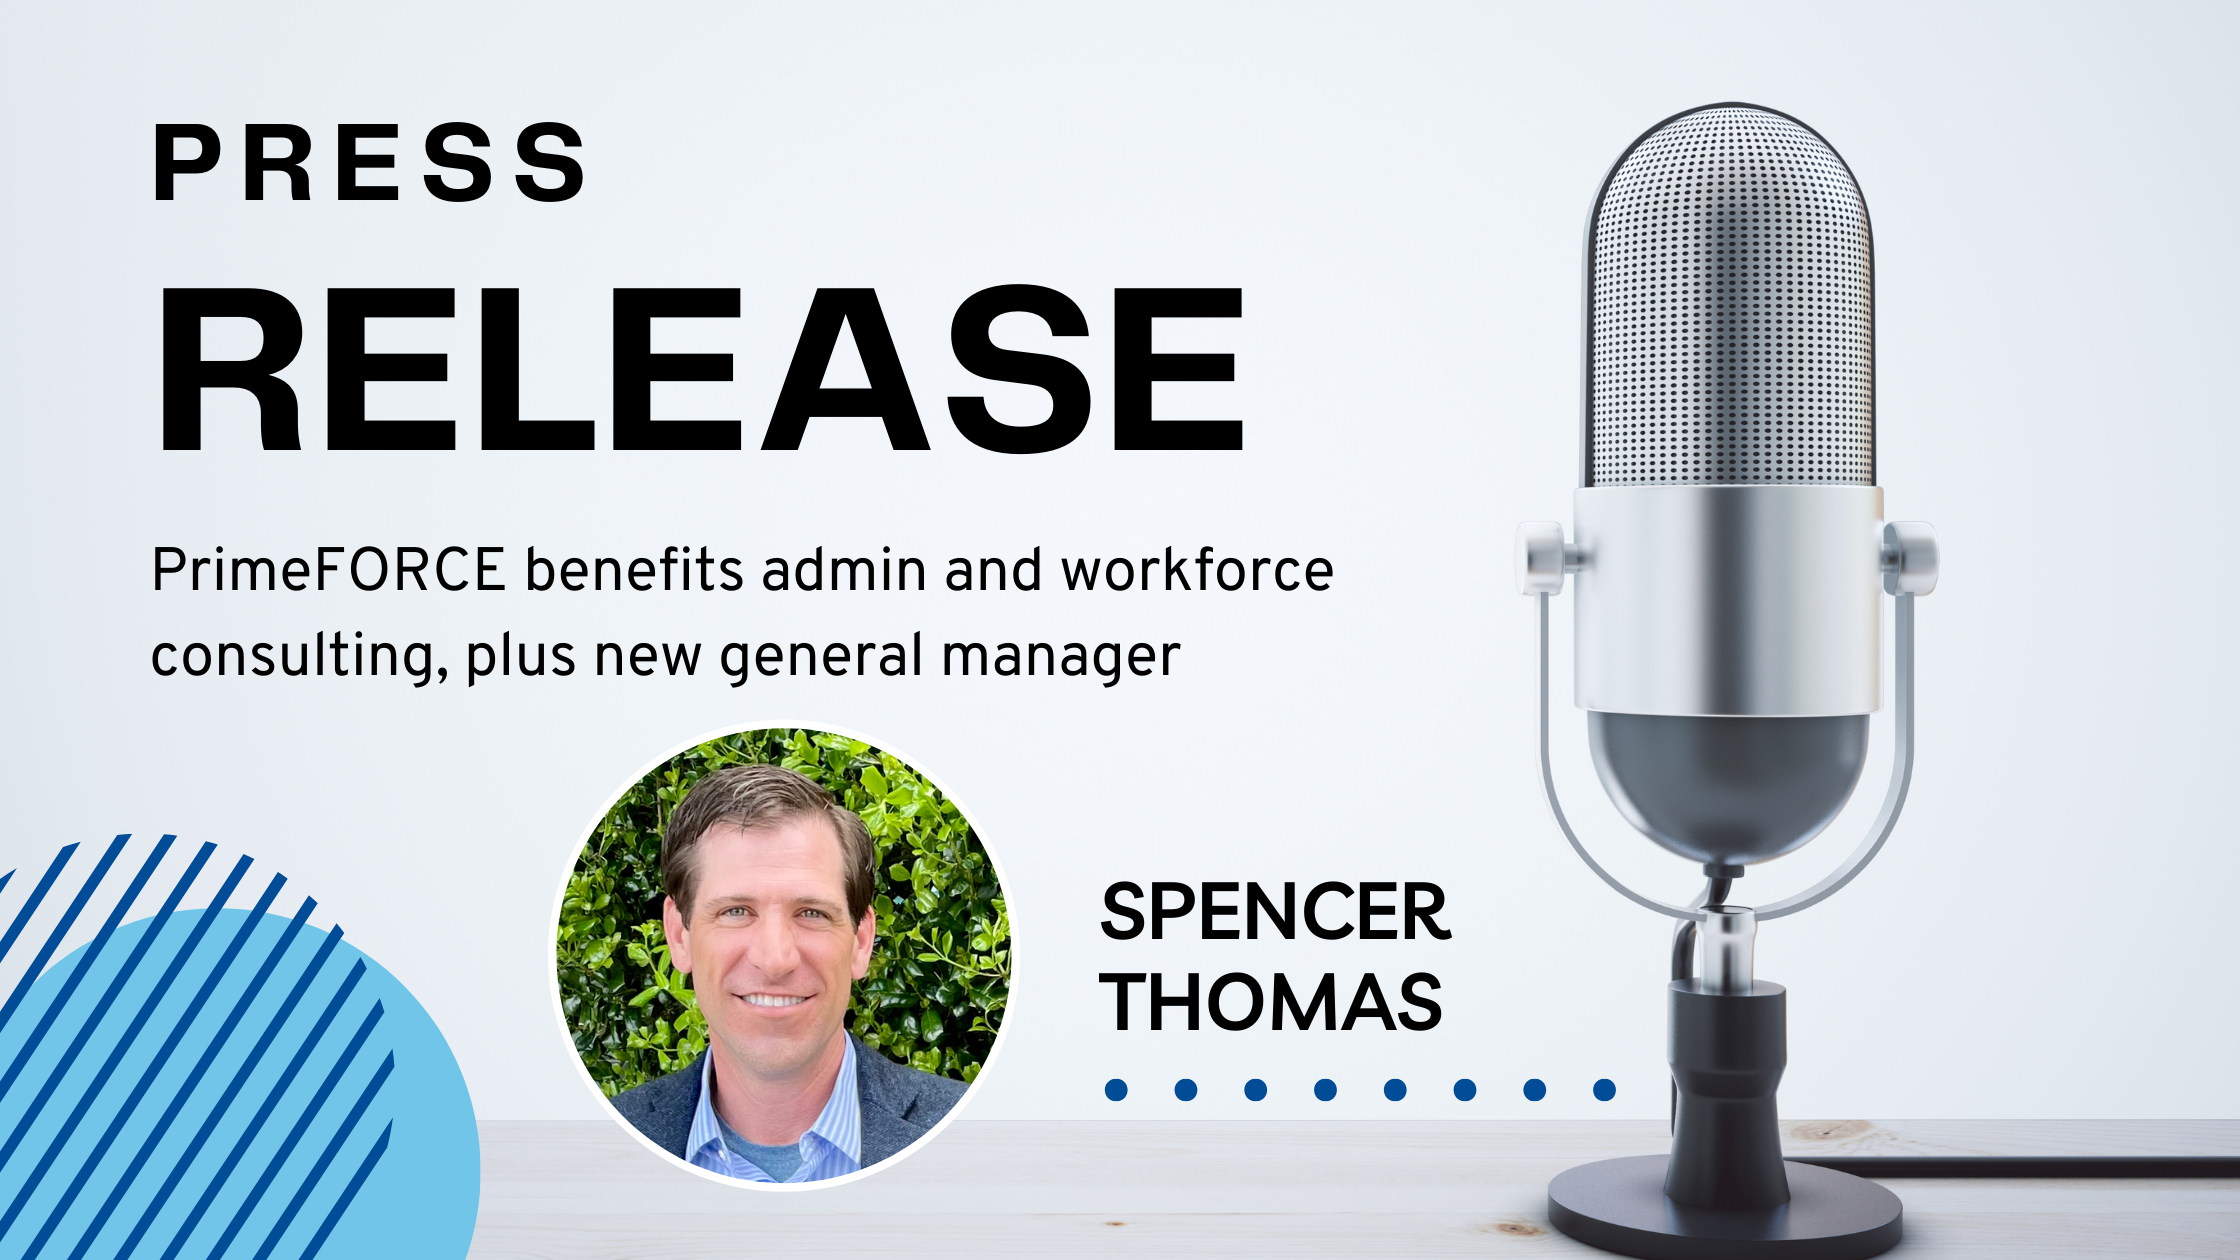 PrimeFORCE Intros Benefits Software, Workforce Consulting, and Spencer Thomas as General Manager